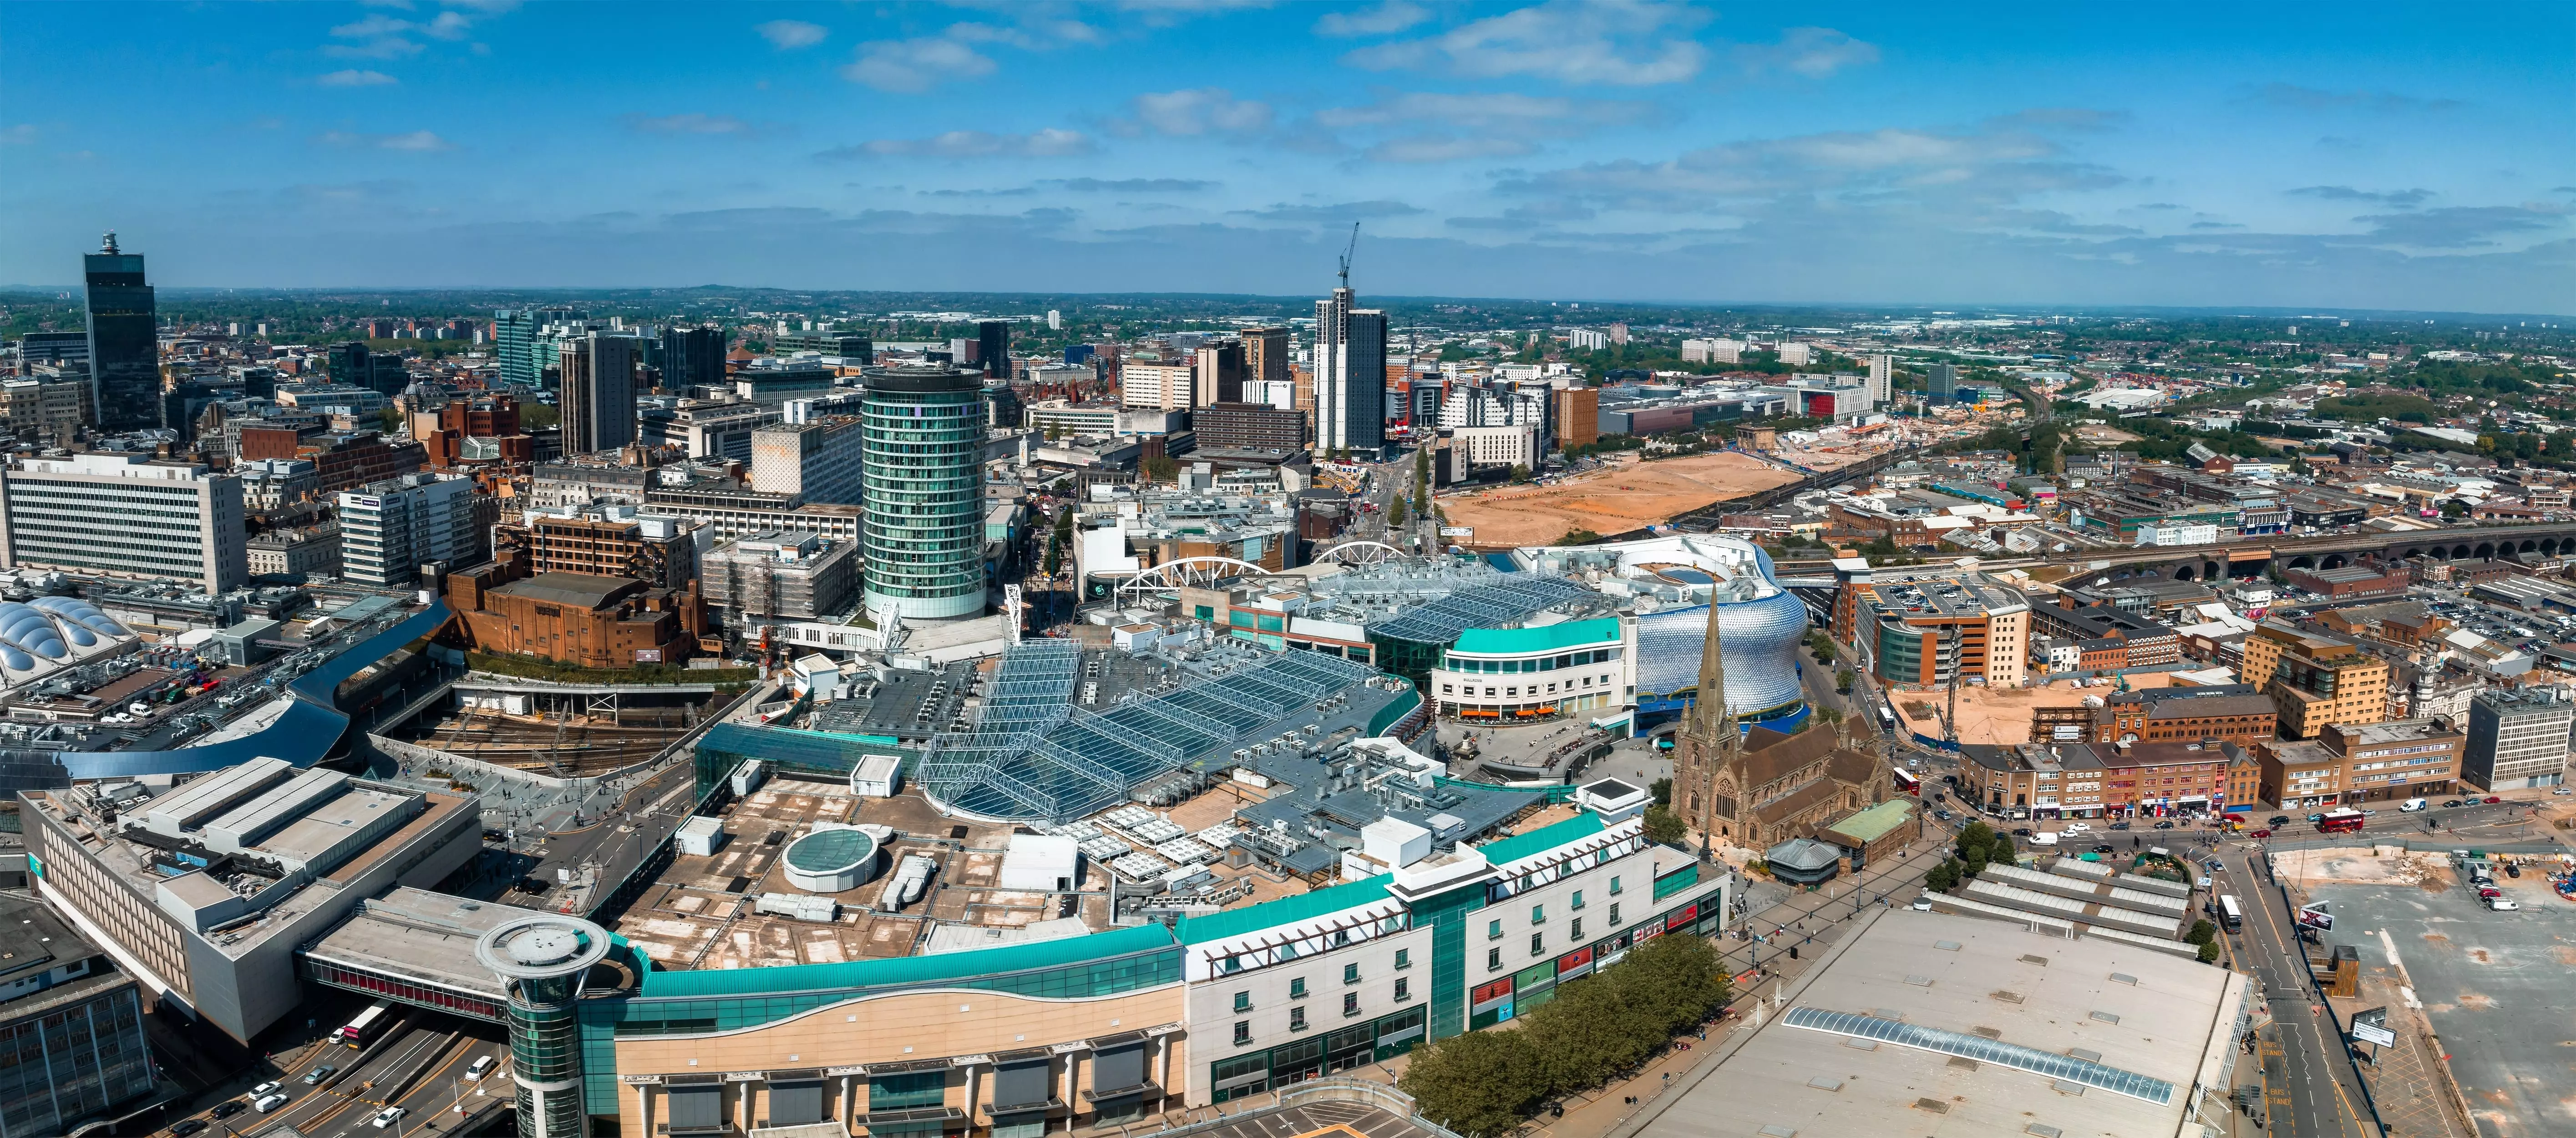 A view of Birmingham’s skyline from above on a bright day with clear skies. Locations visible in the picture include St Martin and the Bullring shopping centre.